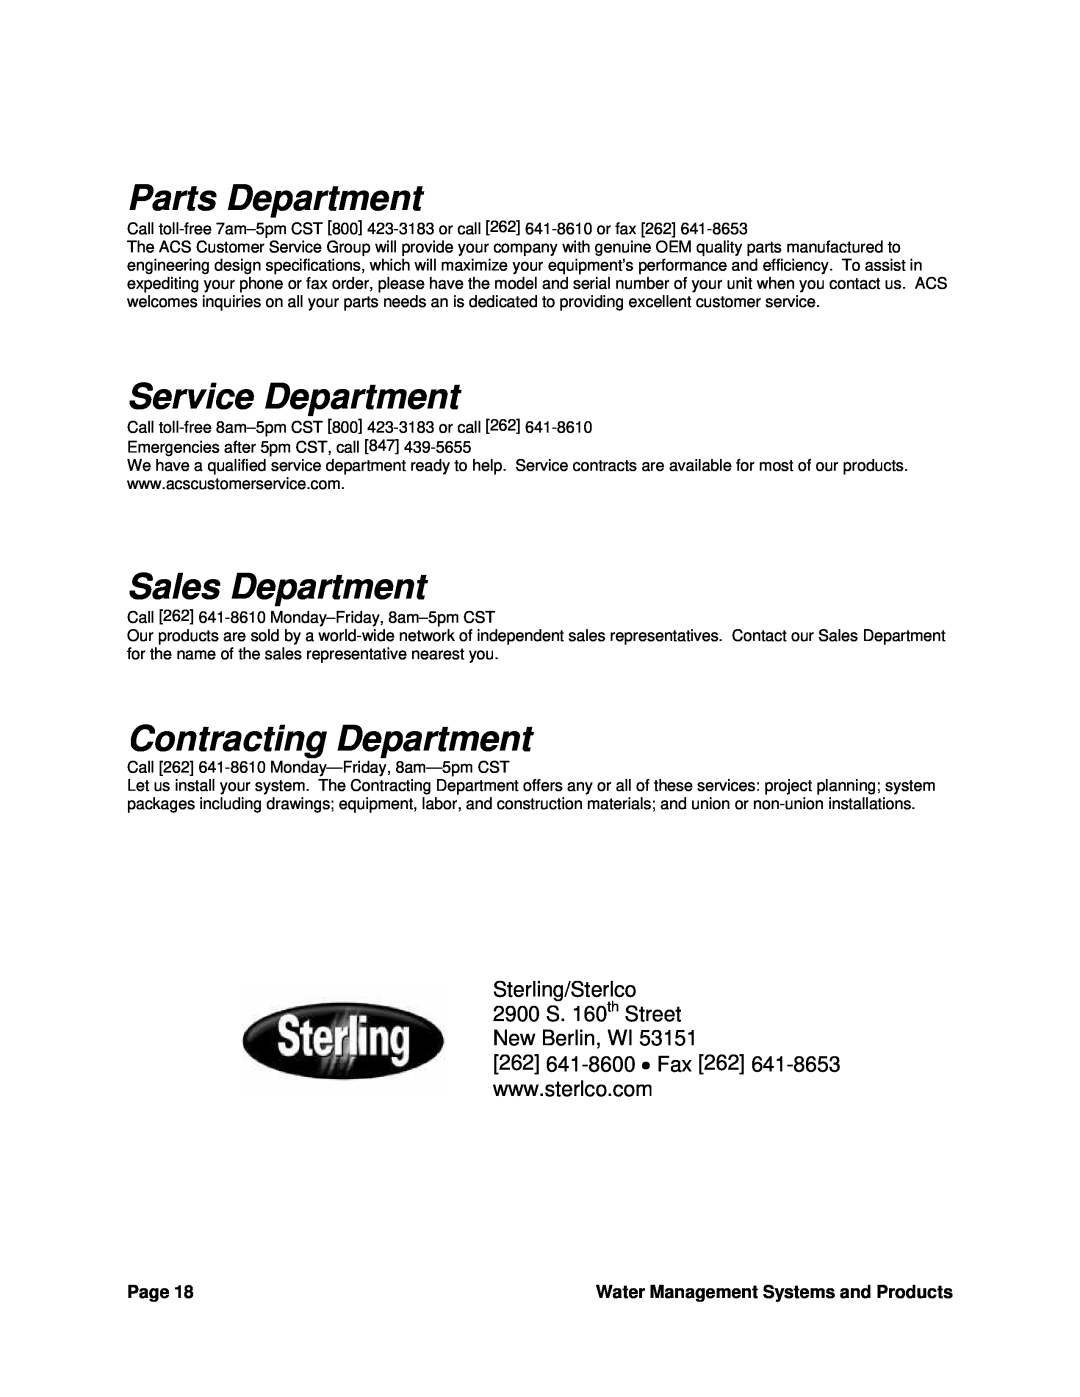 Sterling SGM-250A manual Parts Department, Service Department, Sales Department, Contracting Department, Page 